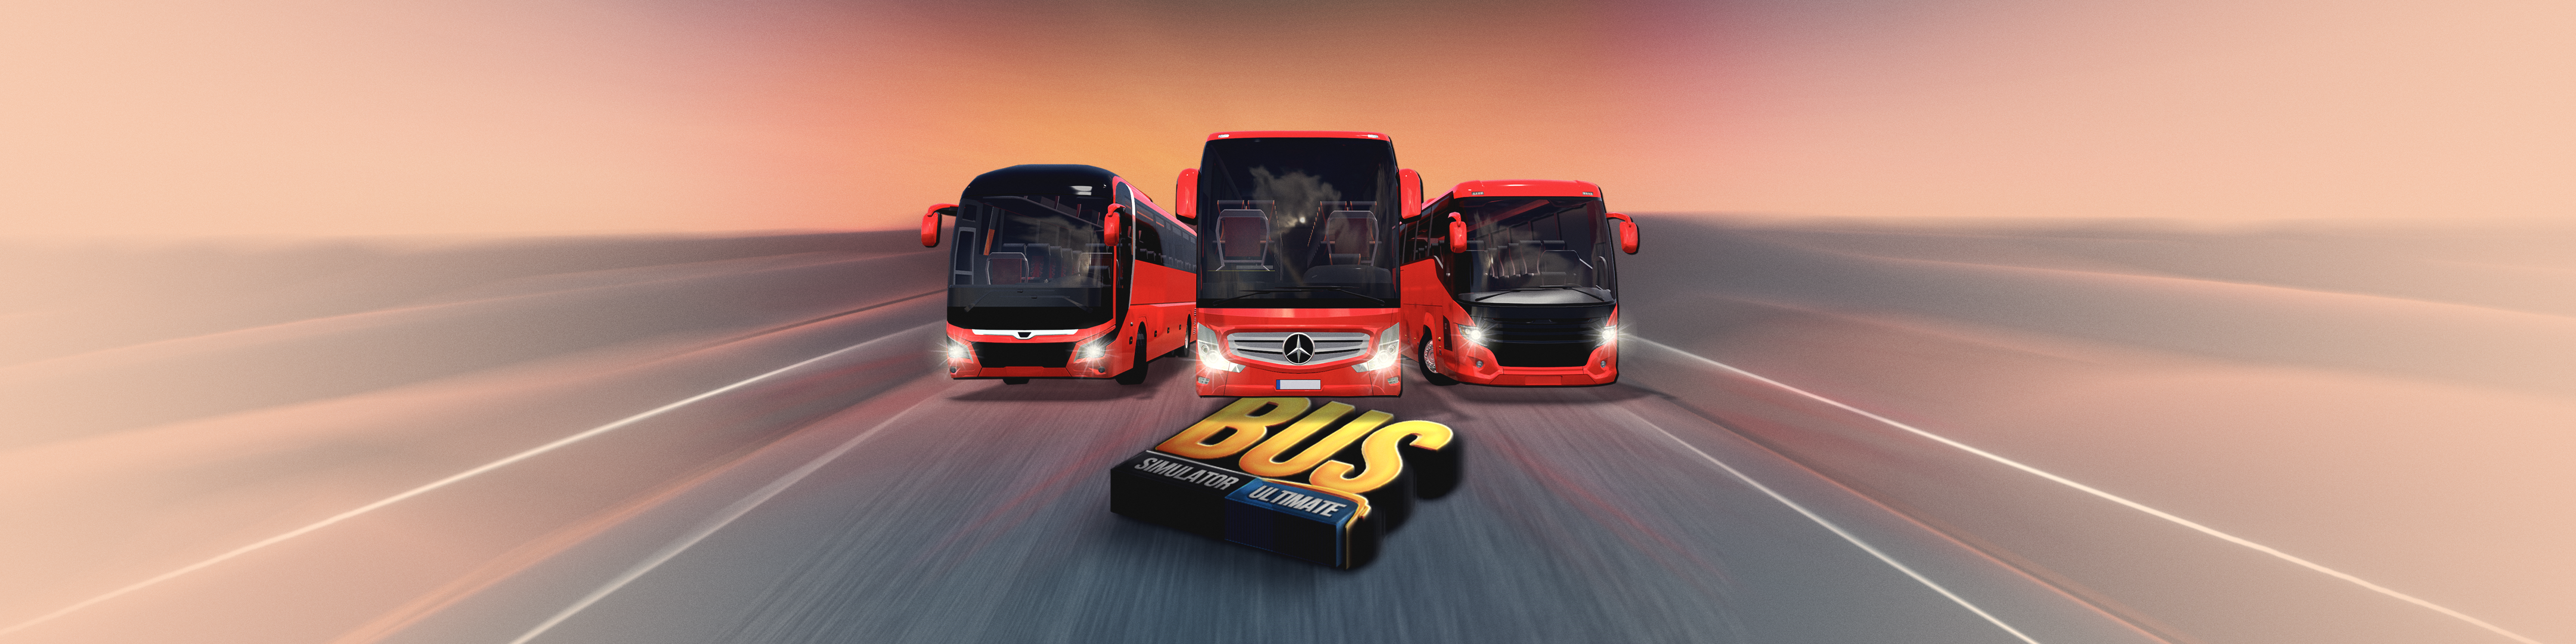 bus simulator games for free on the app store